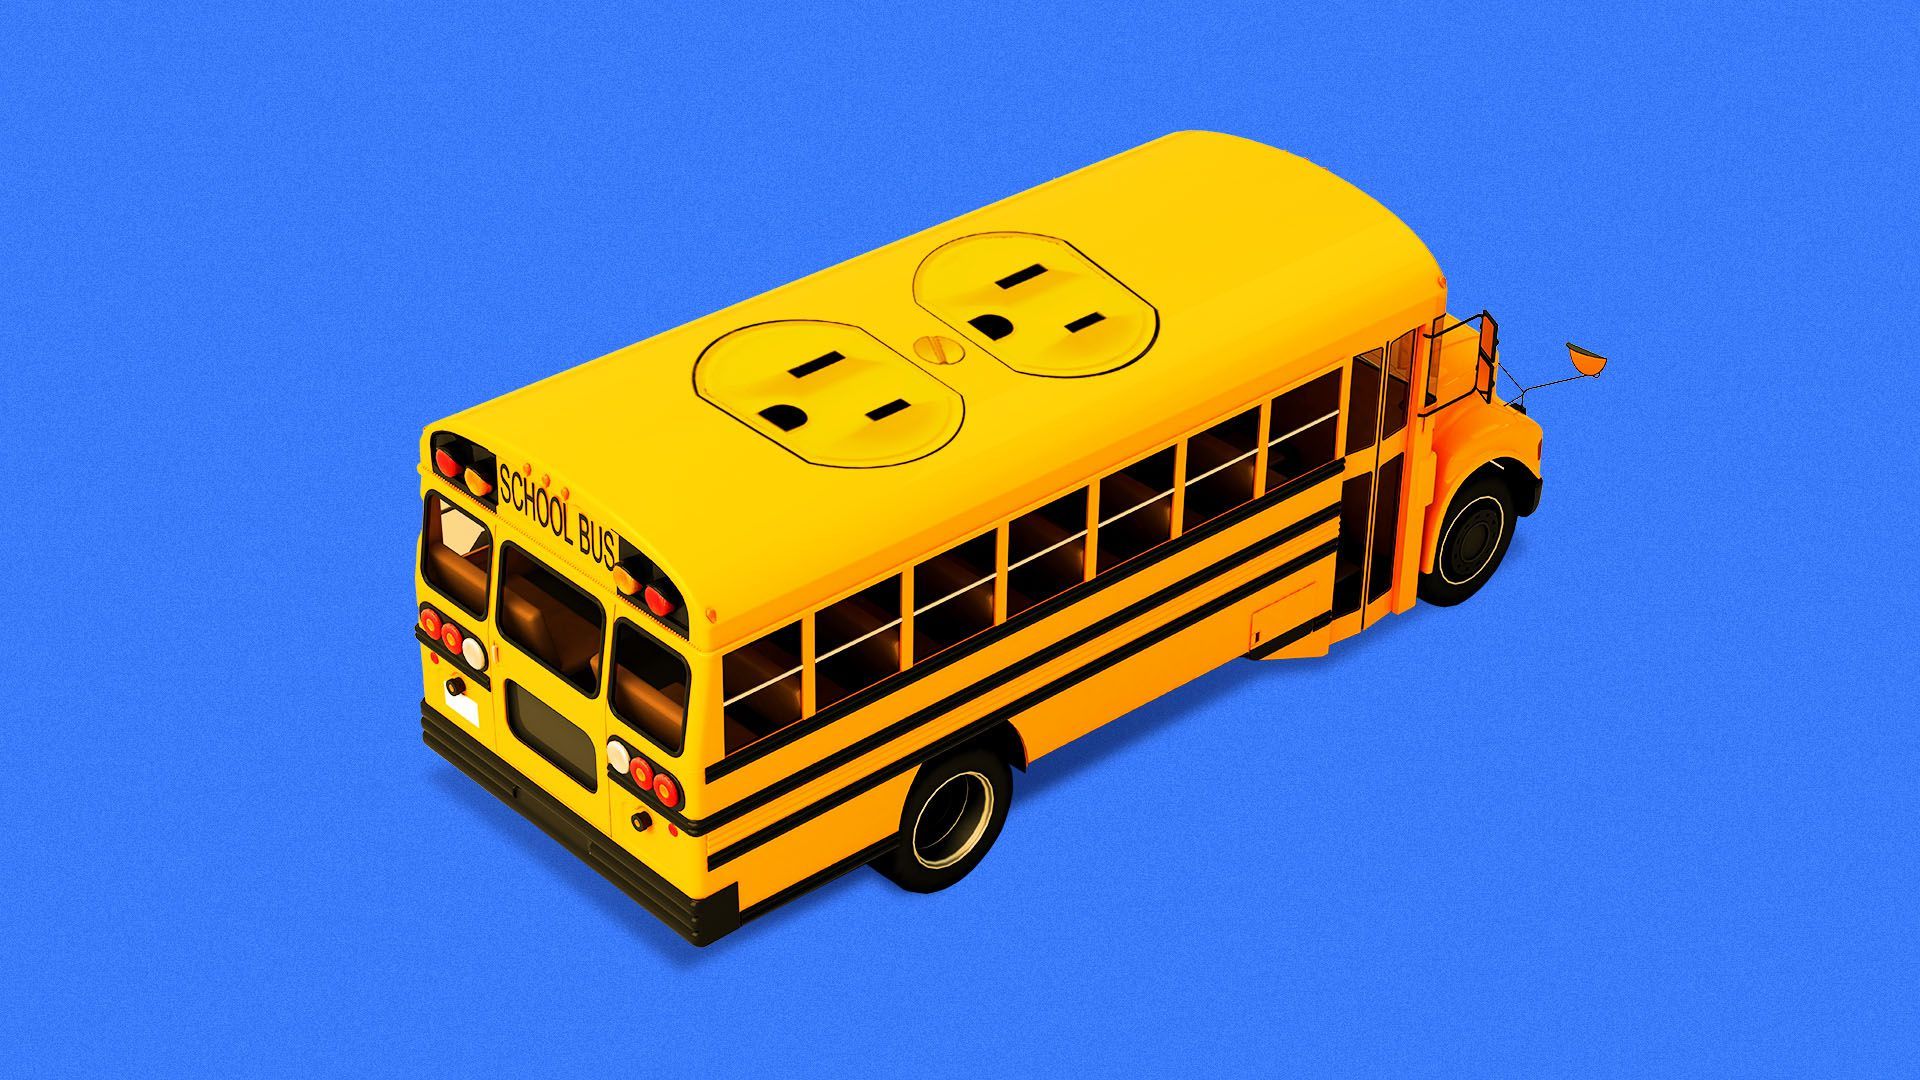 Illustration of a school bus with two electrical outlets on the roof